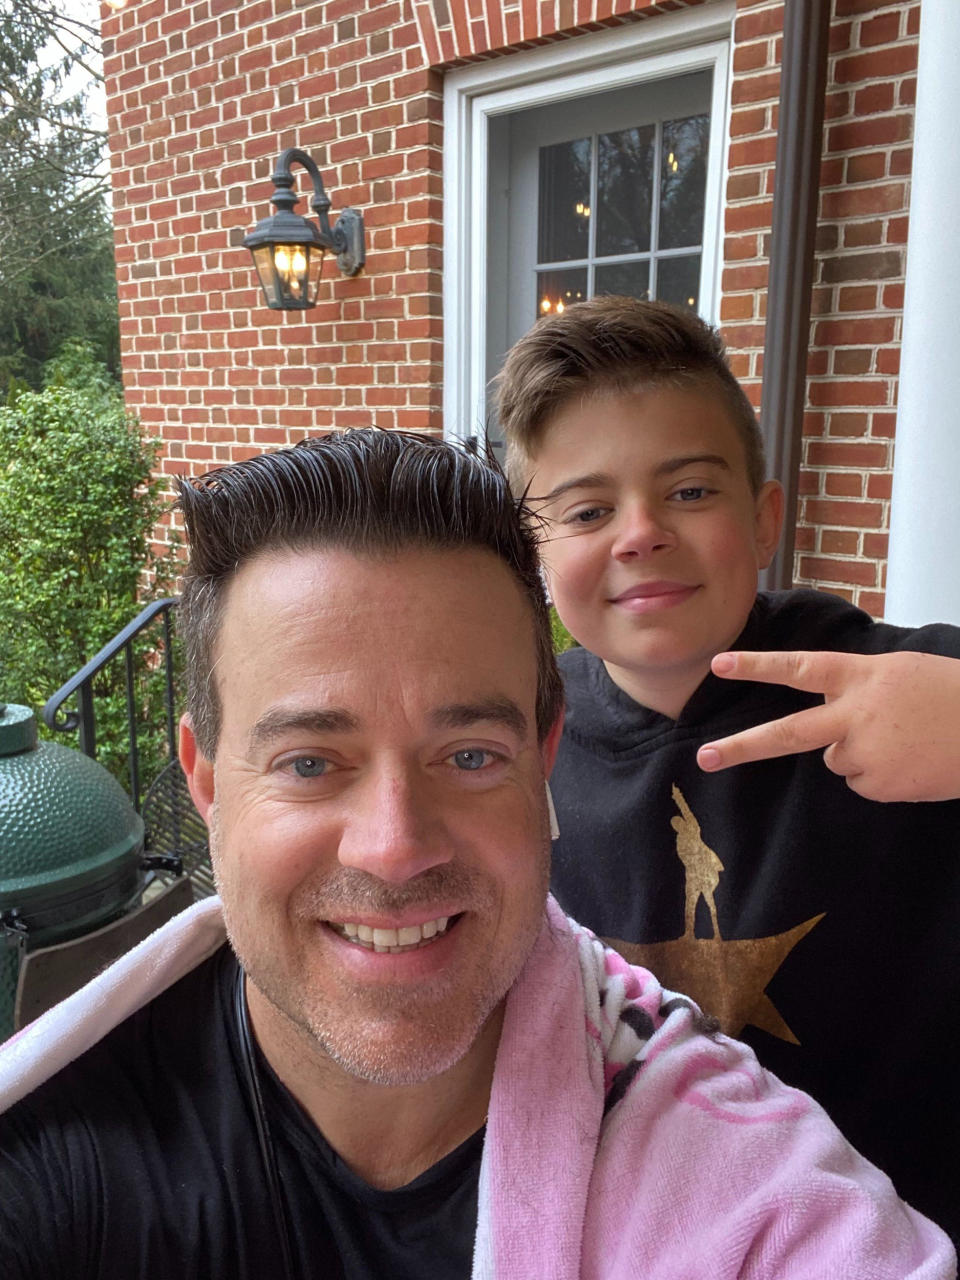 Carson's son Jack, 11, approves of dad's haircut! (Carson Daly)